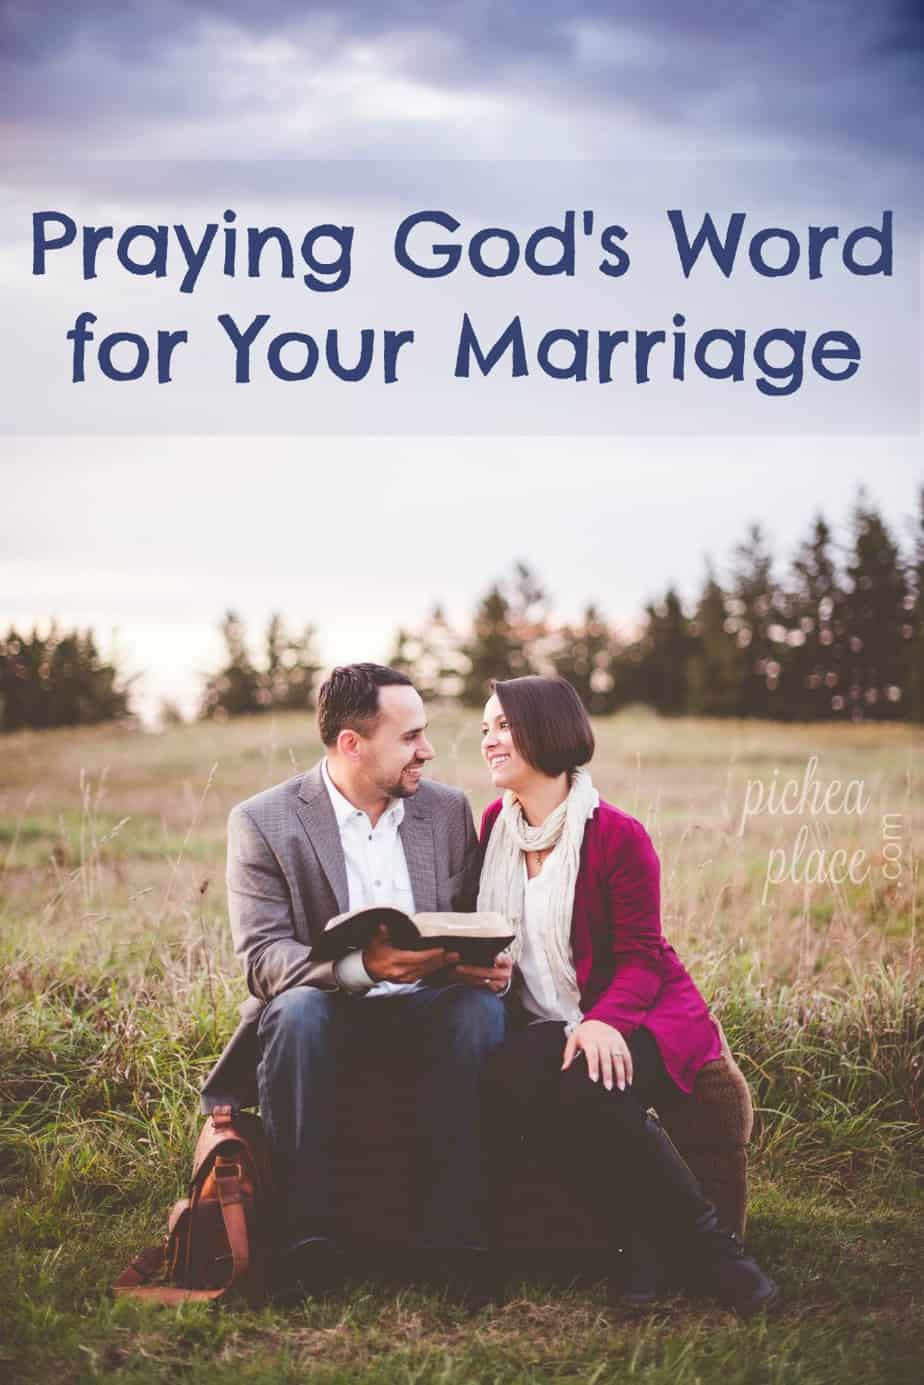 Praying God's Word for Your Marriage | marriage prayers based on Scripture | pray for husband | pray for wife